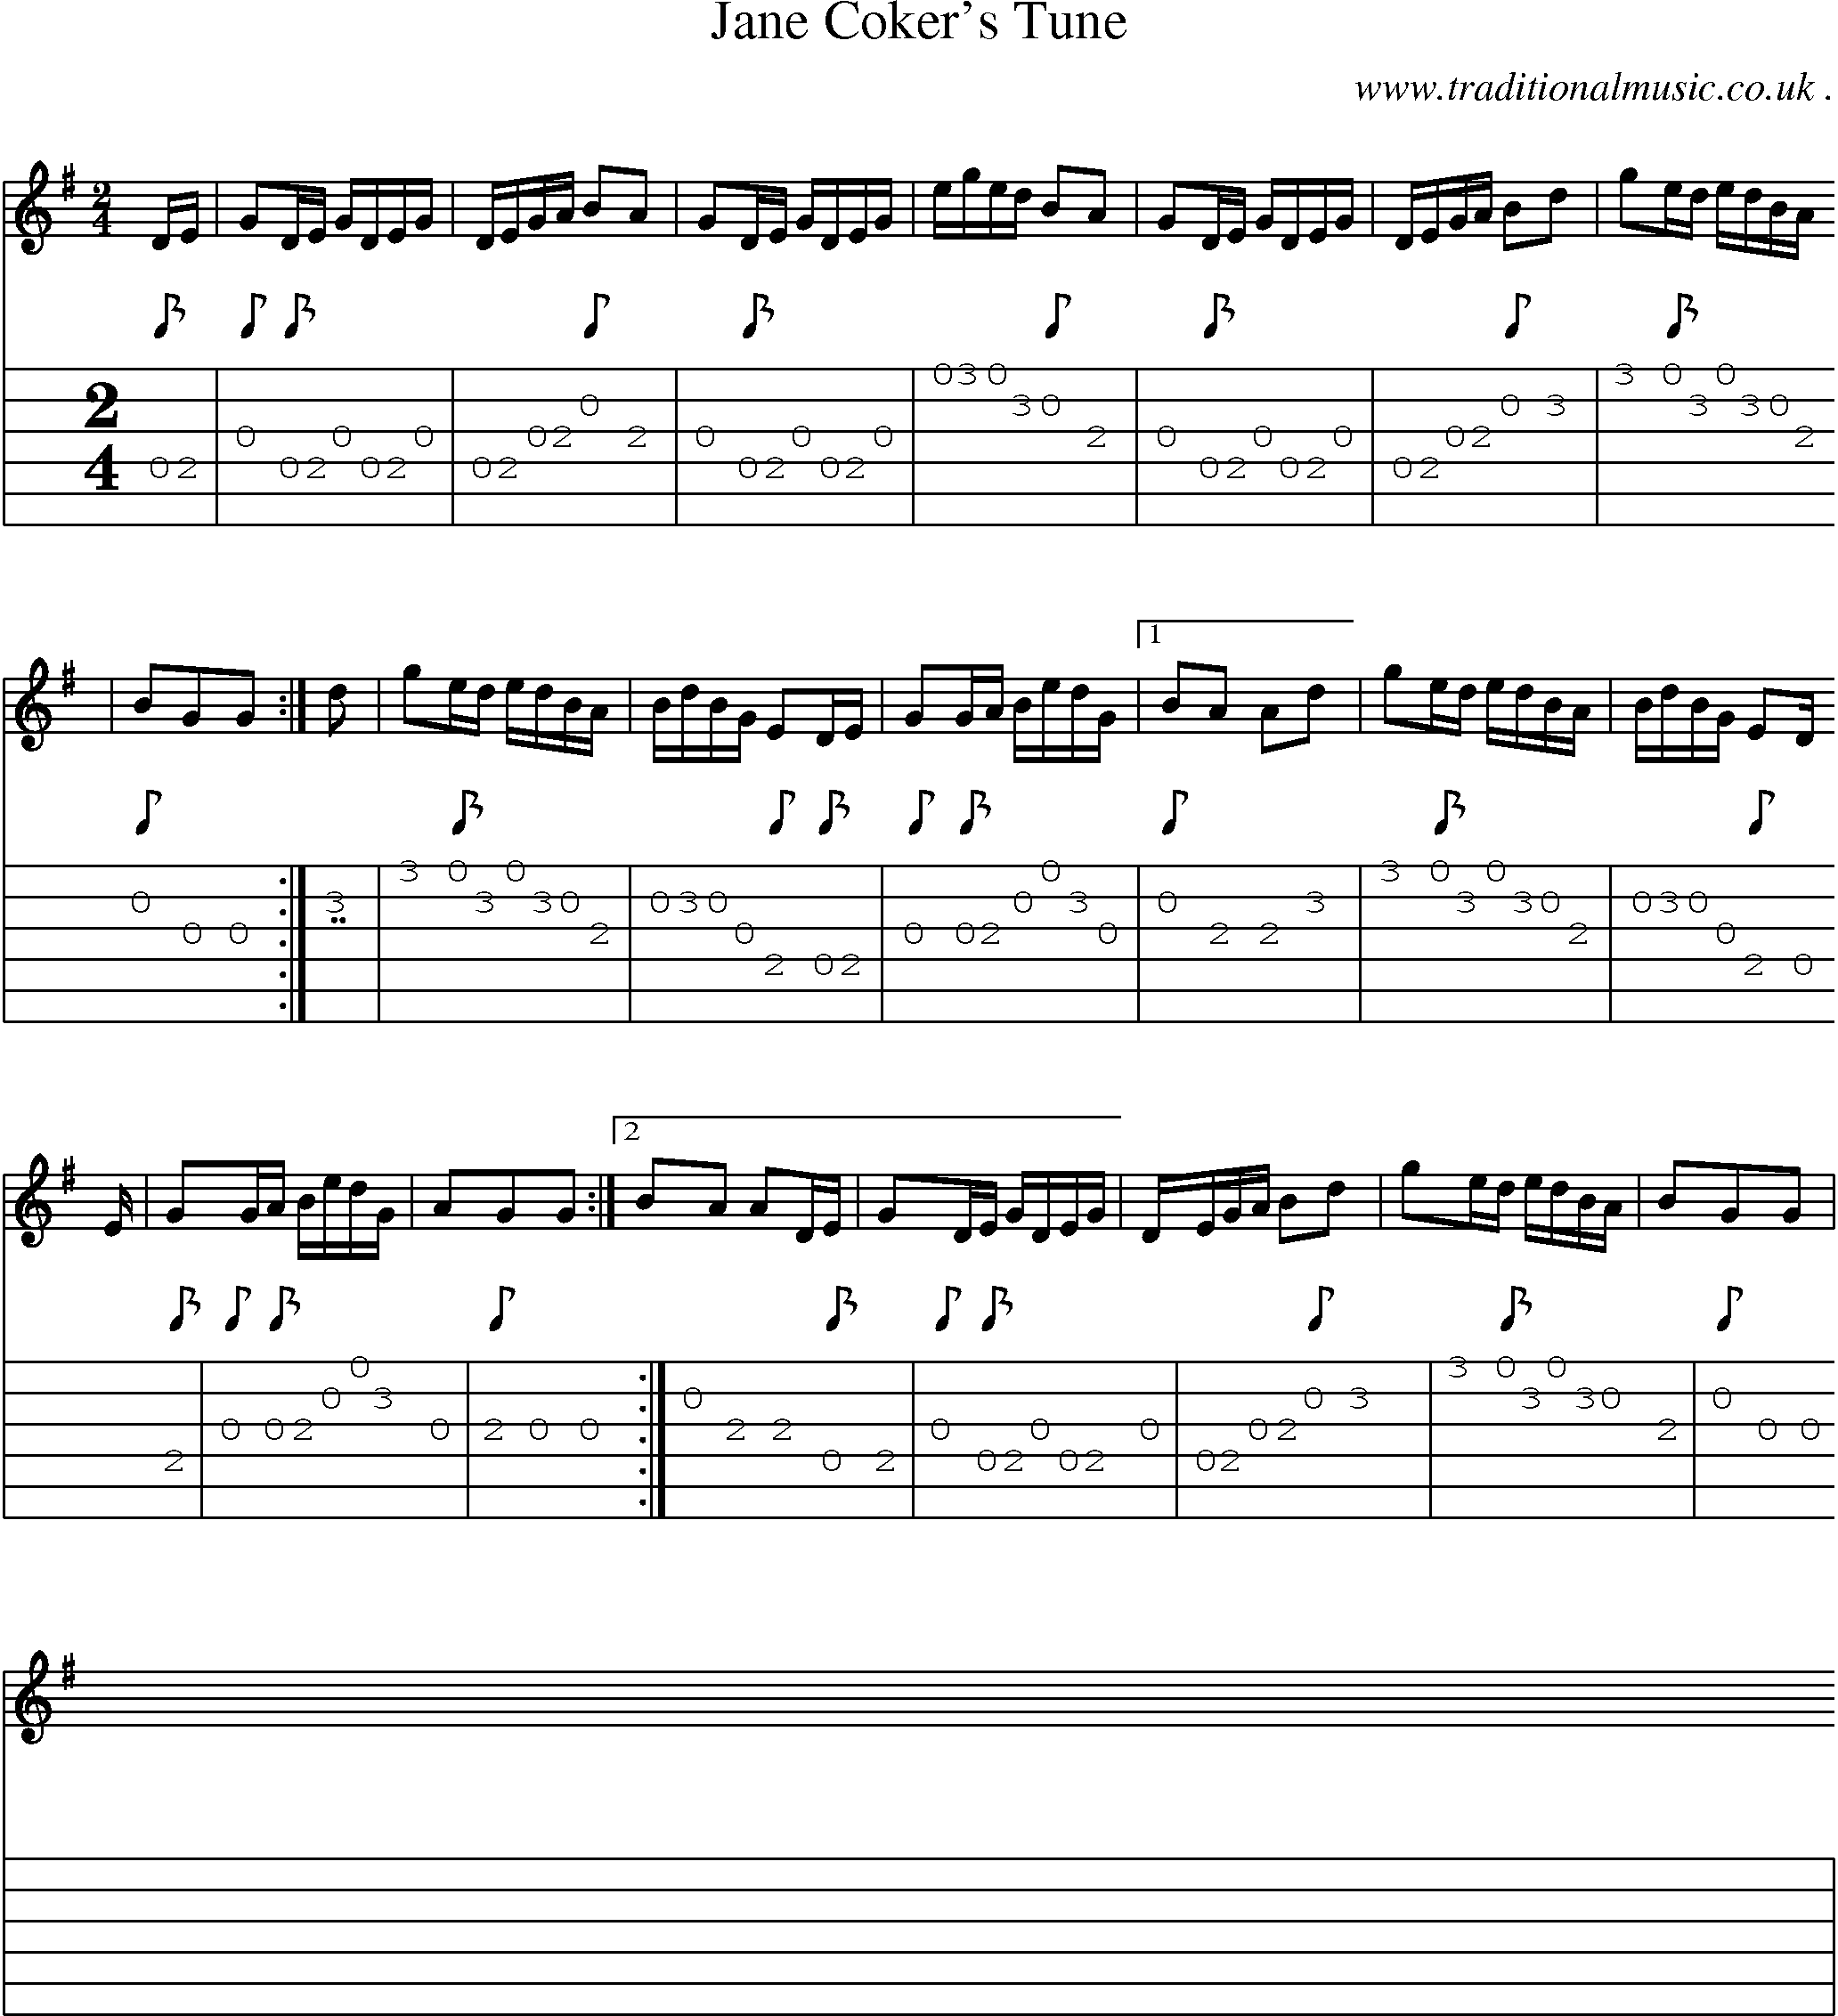 Sheet-Music and Guitar Tabs for Jane Cokers Tune